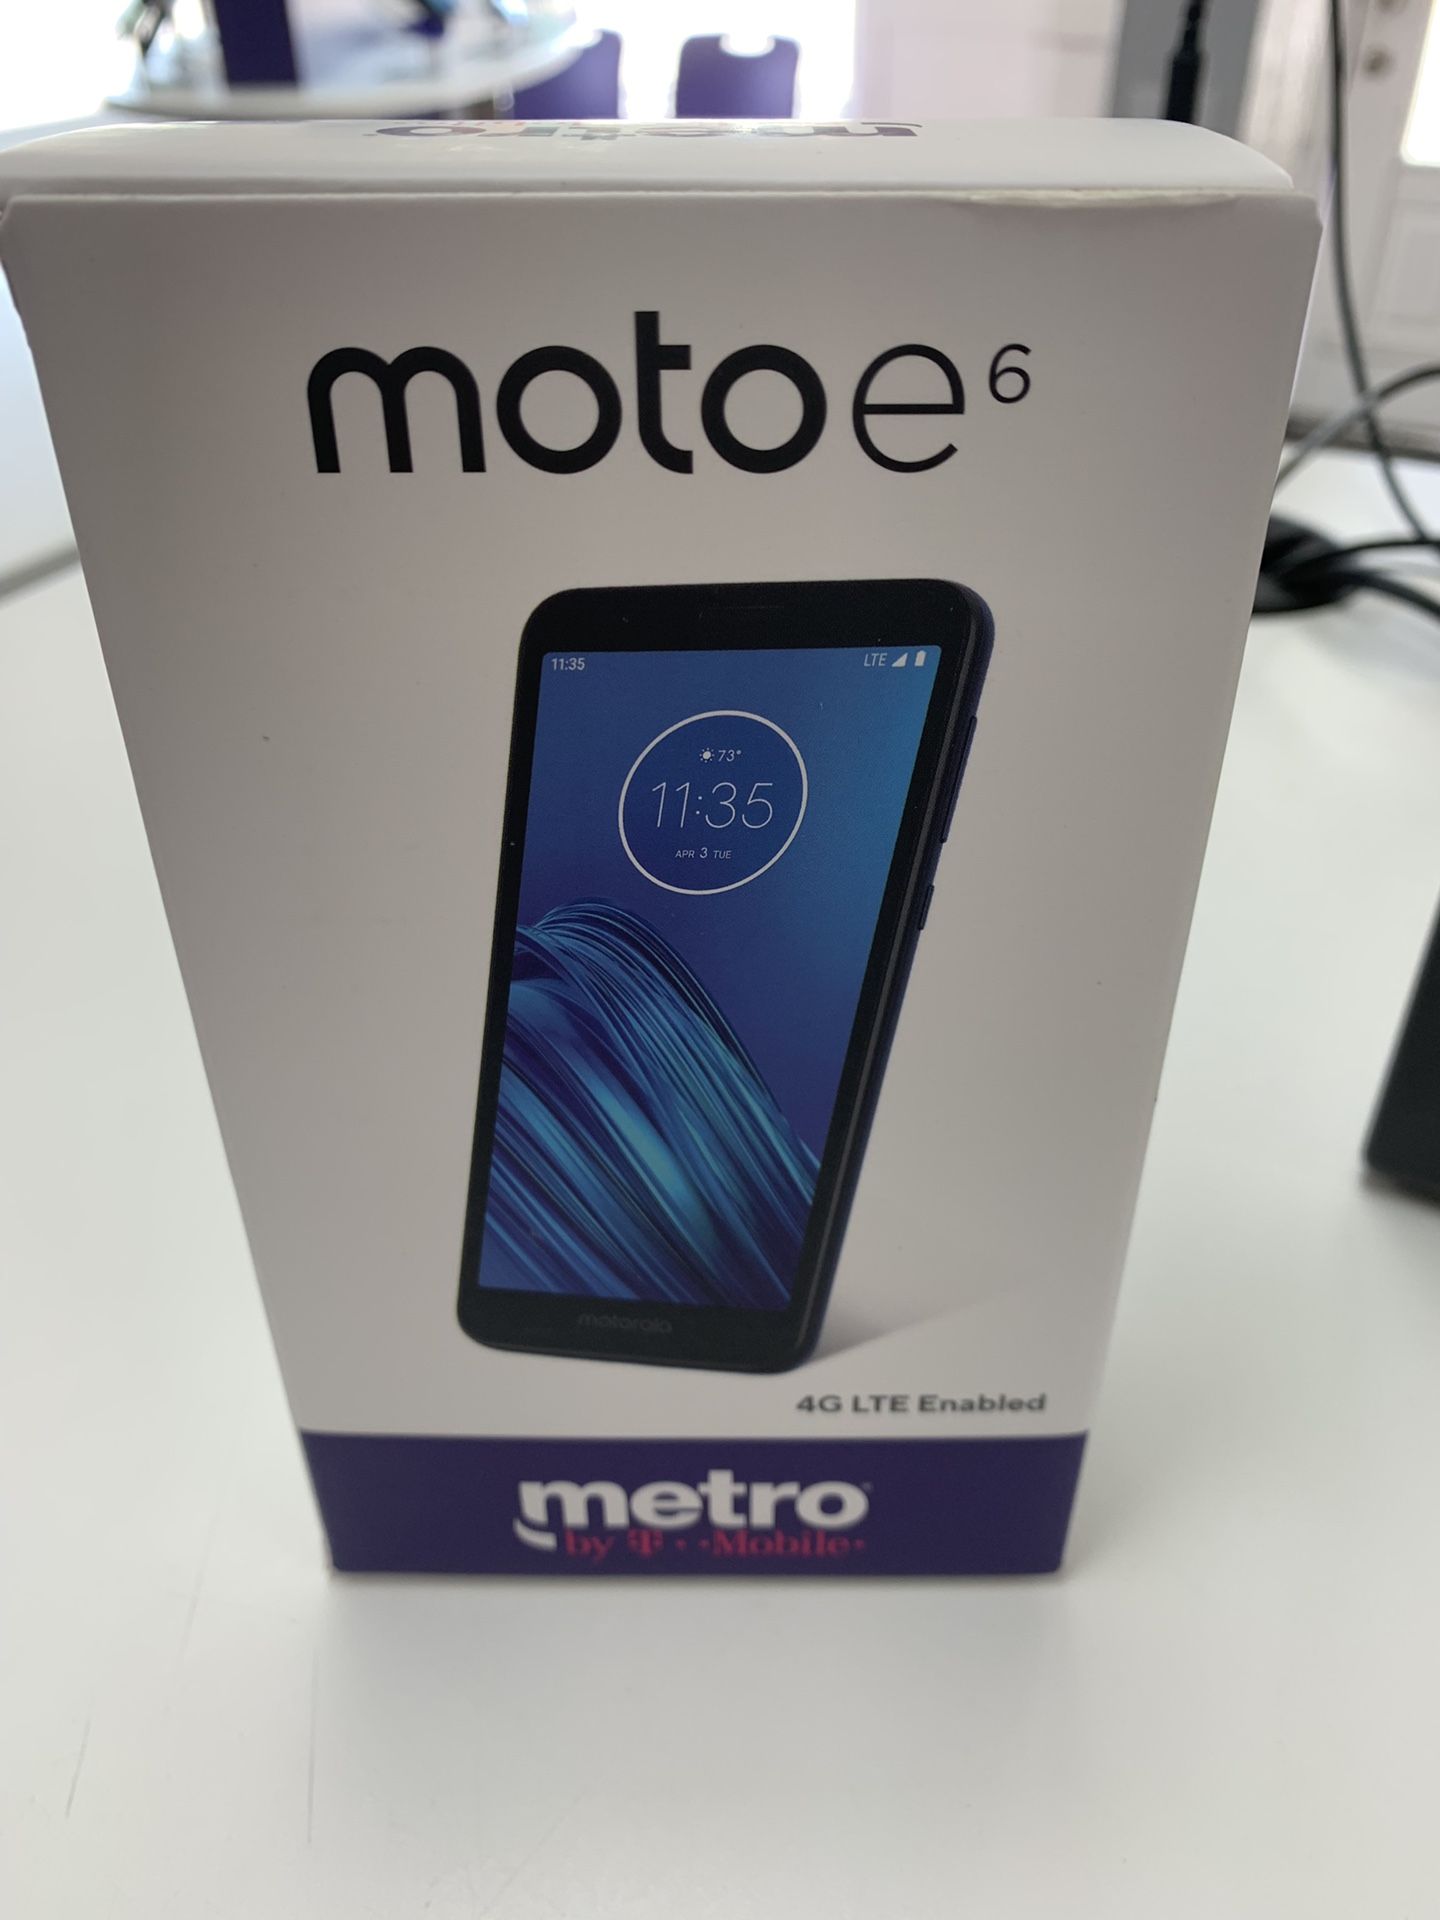 Free Moto E6 Starting New Line From Metro by T-Mobile